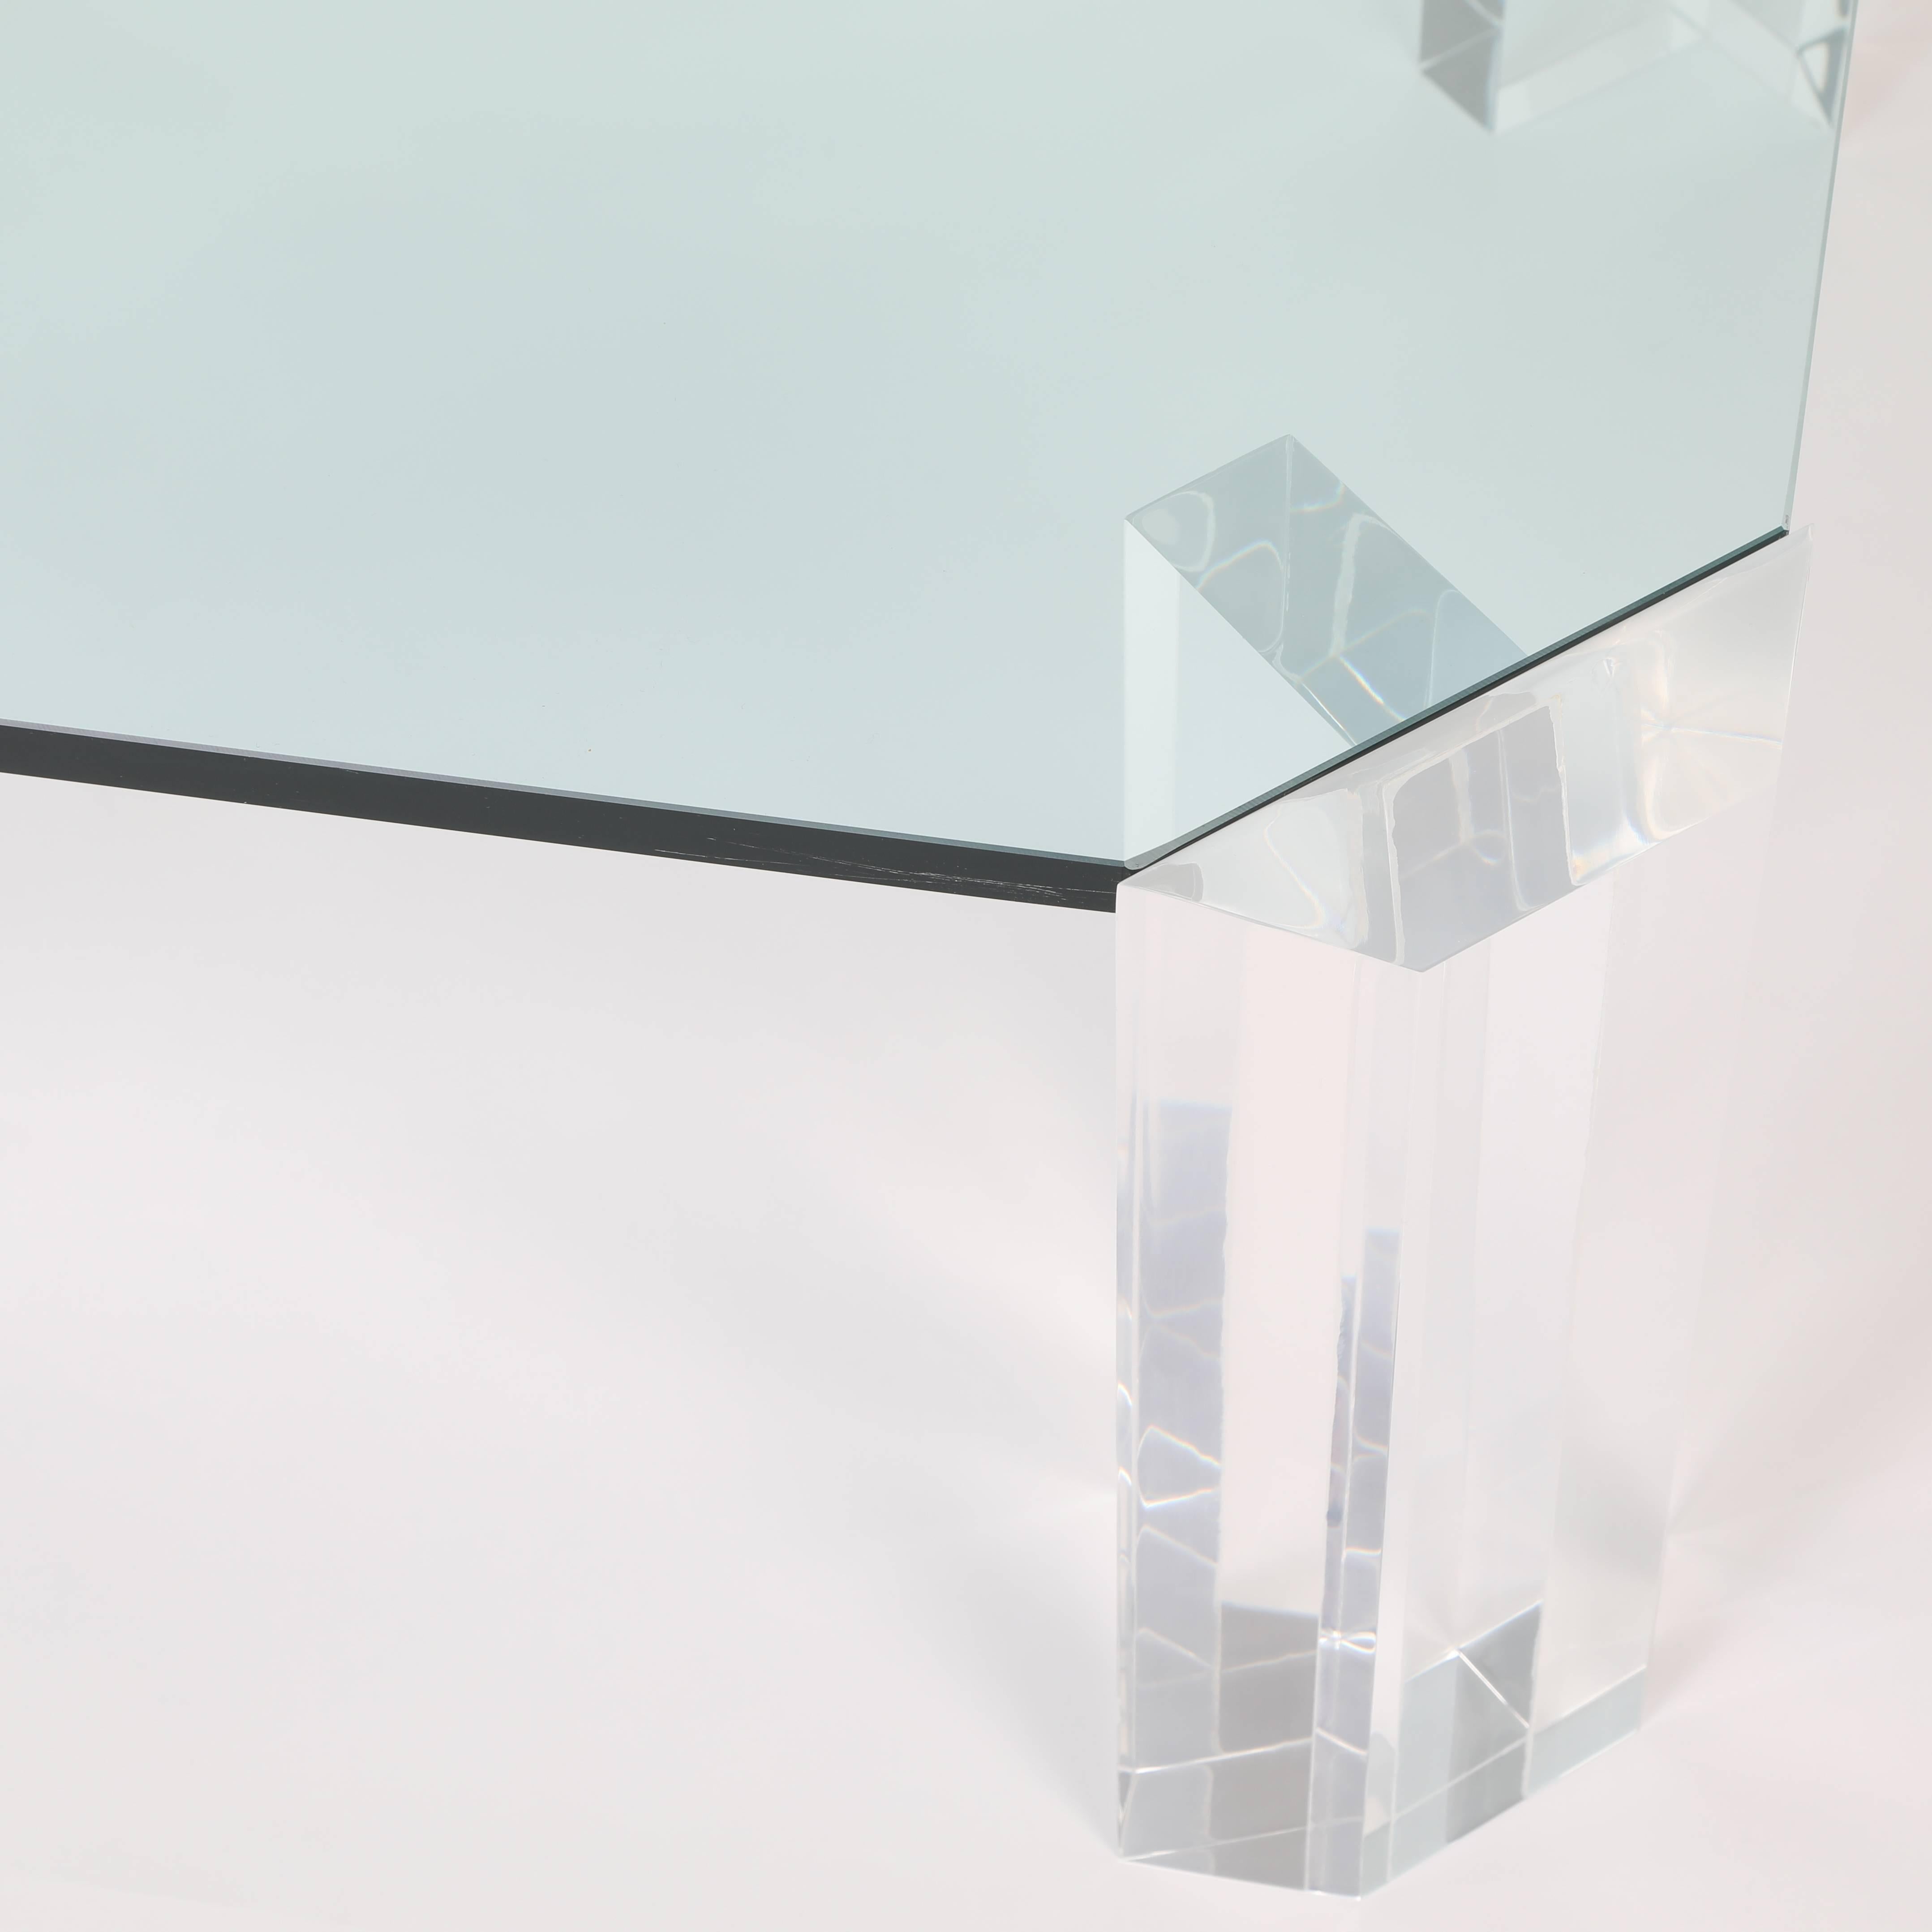 Rectangular 1970s Glass Cocktail Table with Clipped Corners and Lucite Supports For Sale 1